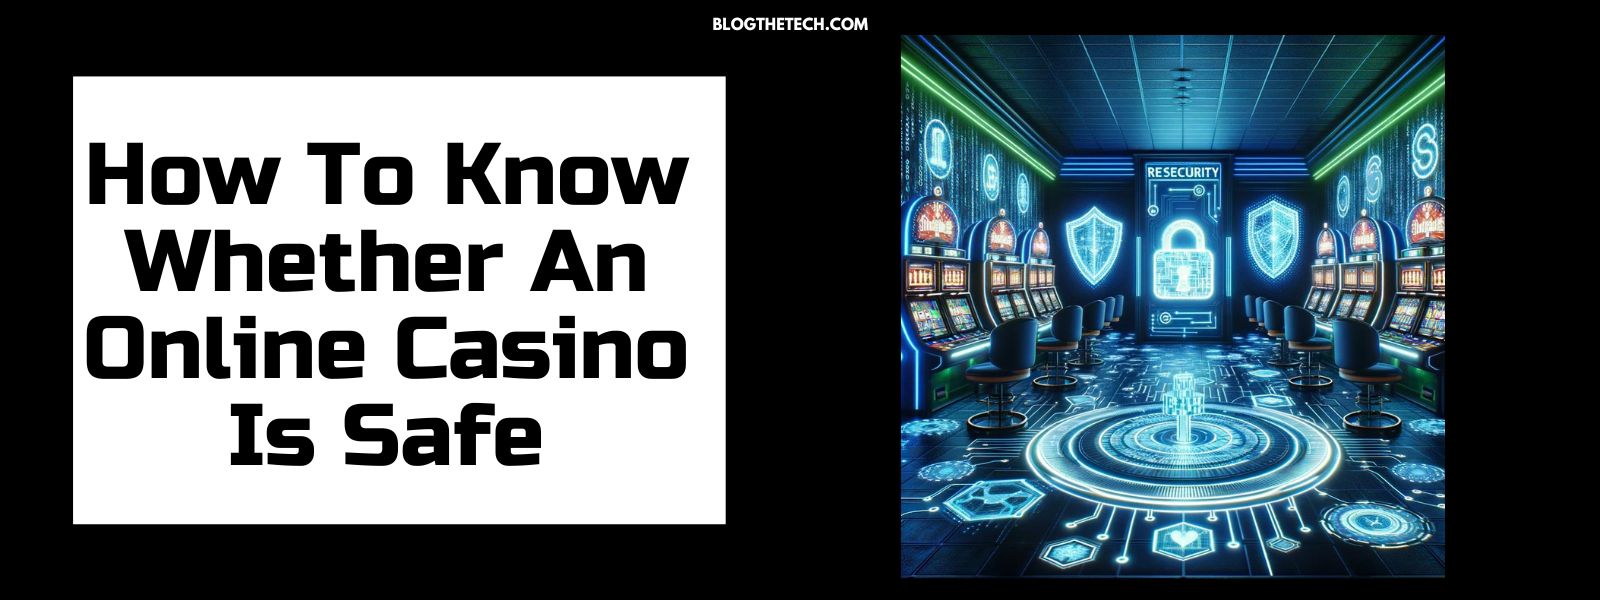 How To Know Whether An Online Casino Is Safe